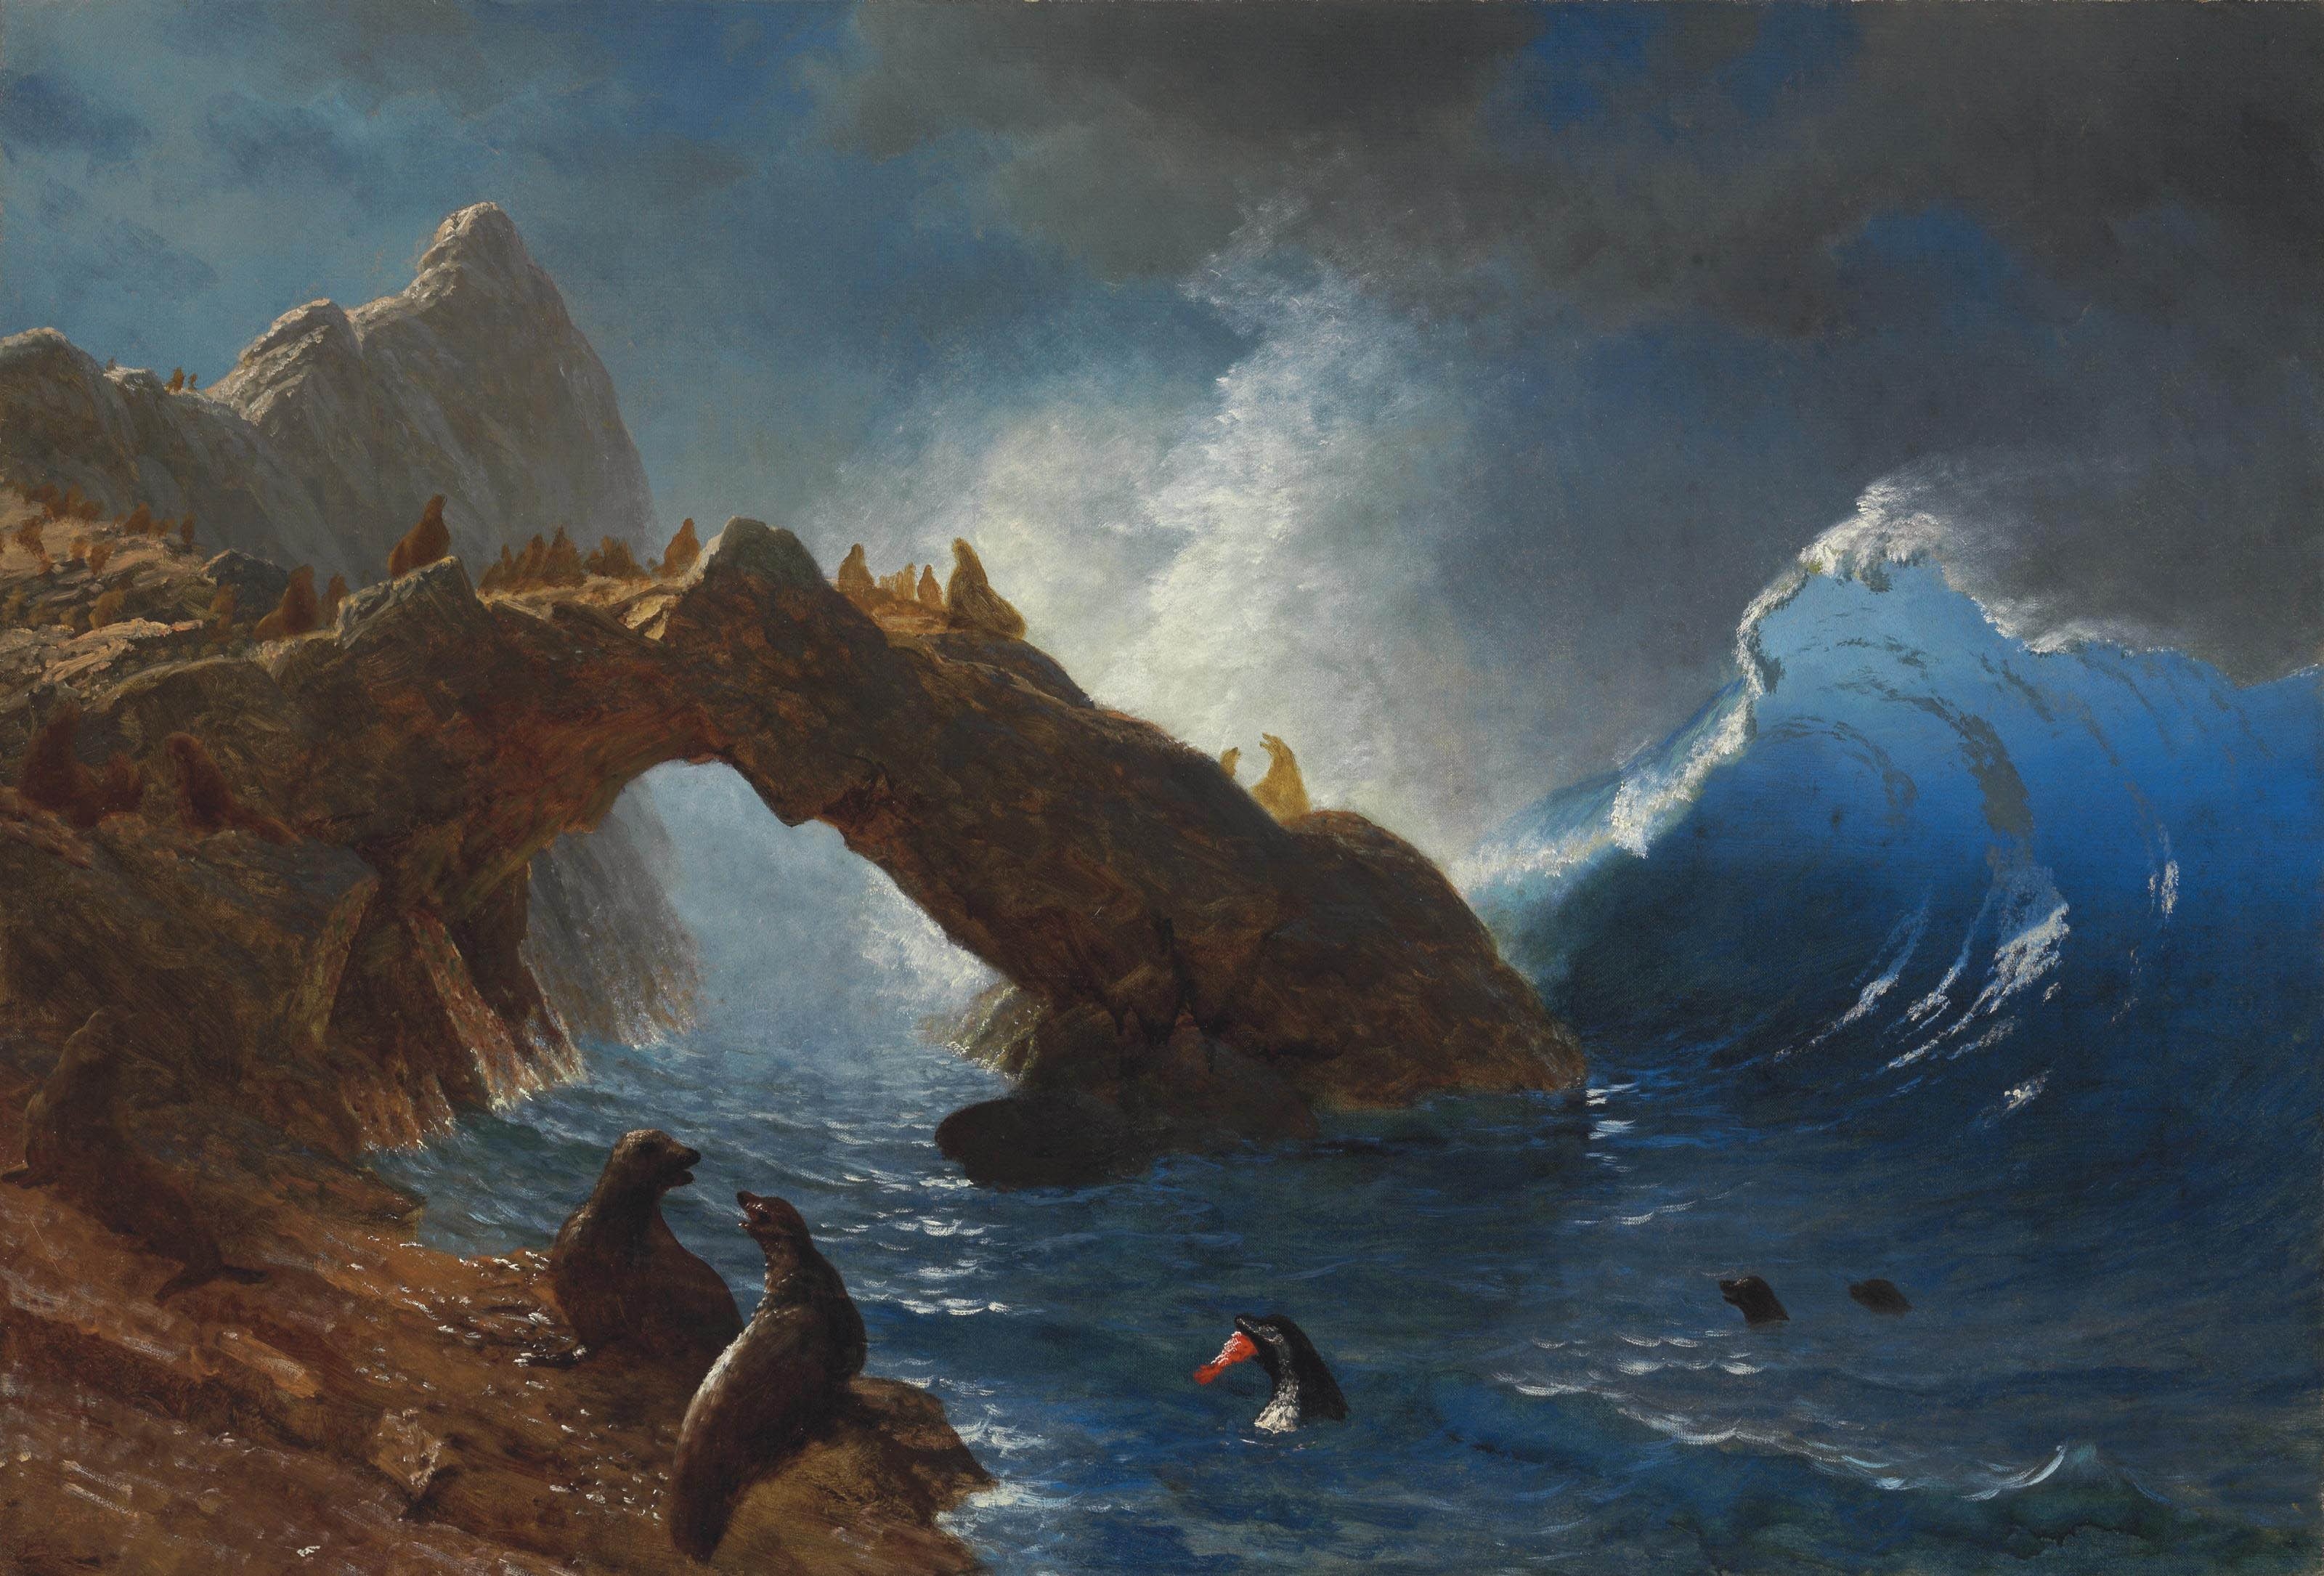 Seals on the Rocks by Albert Bierstadt - ca. 1873 - 76.8 x 111.8 cm private collection